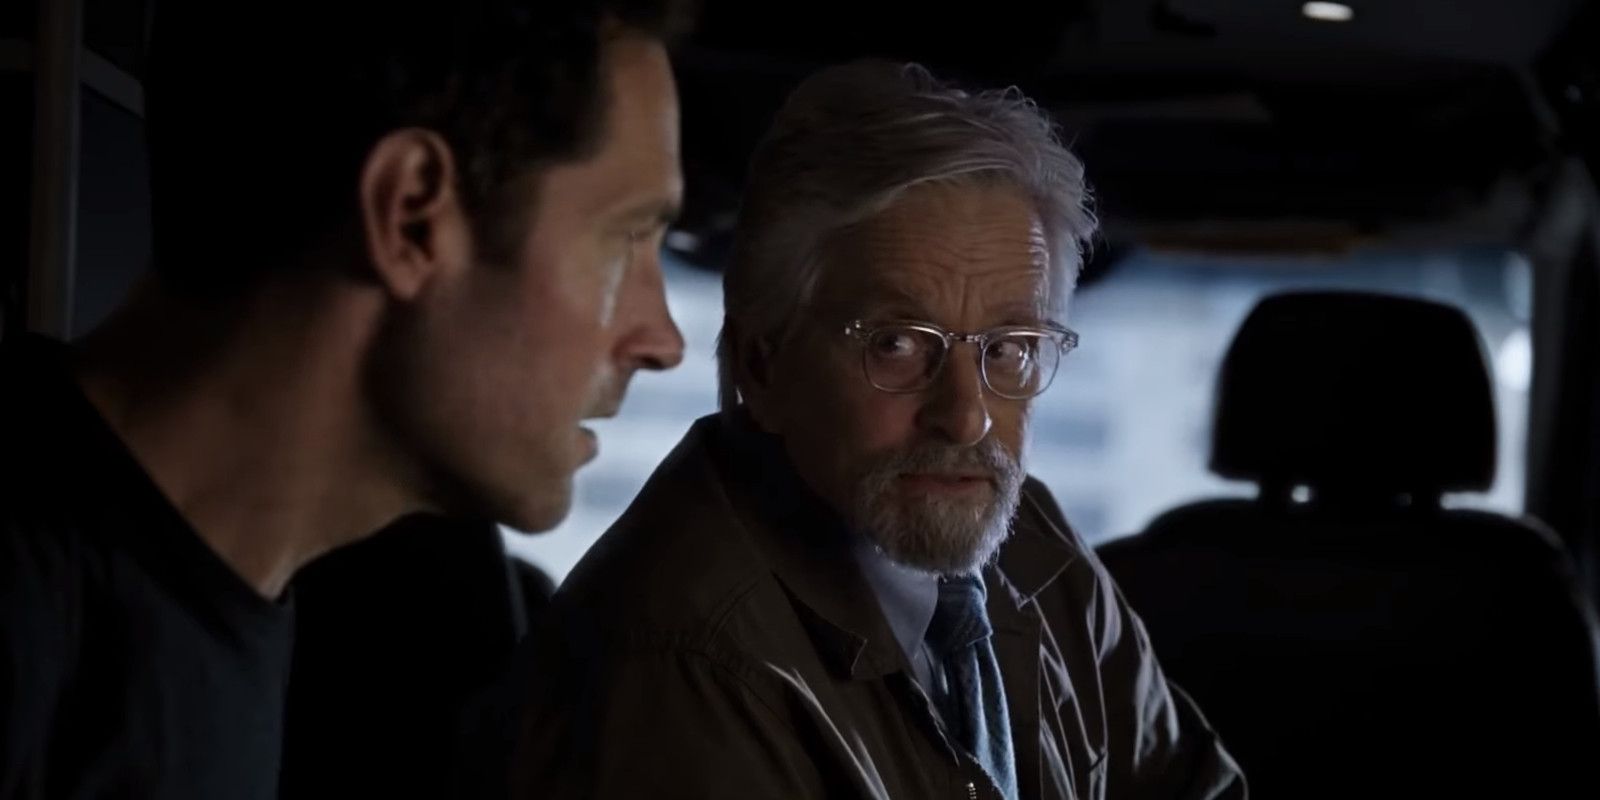 Ant Man and the Wasp Scott Lang Looks at Hank Pym